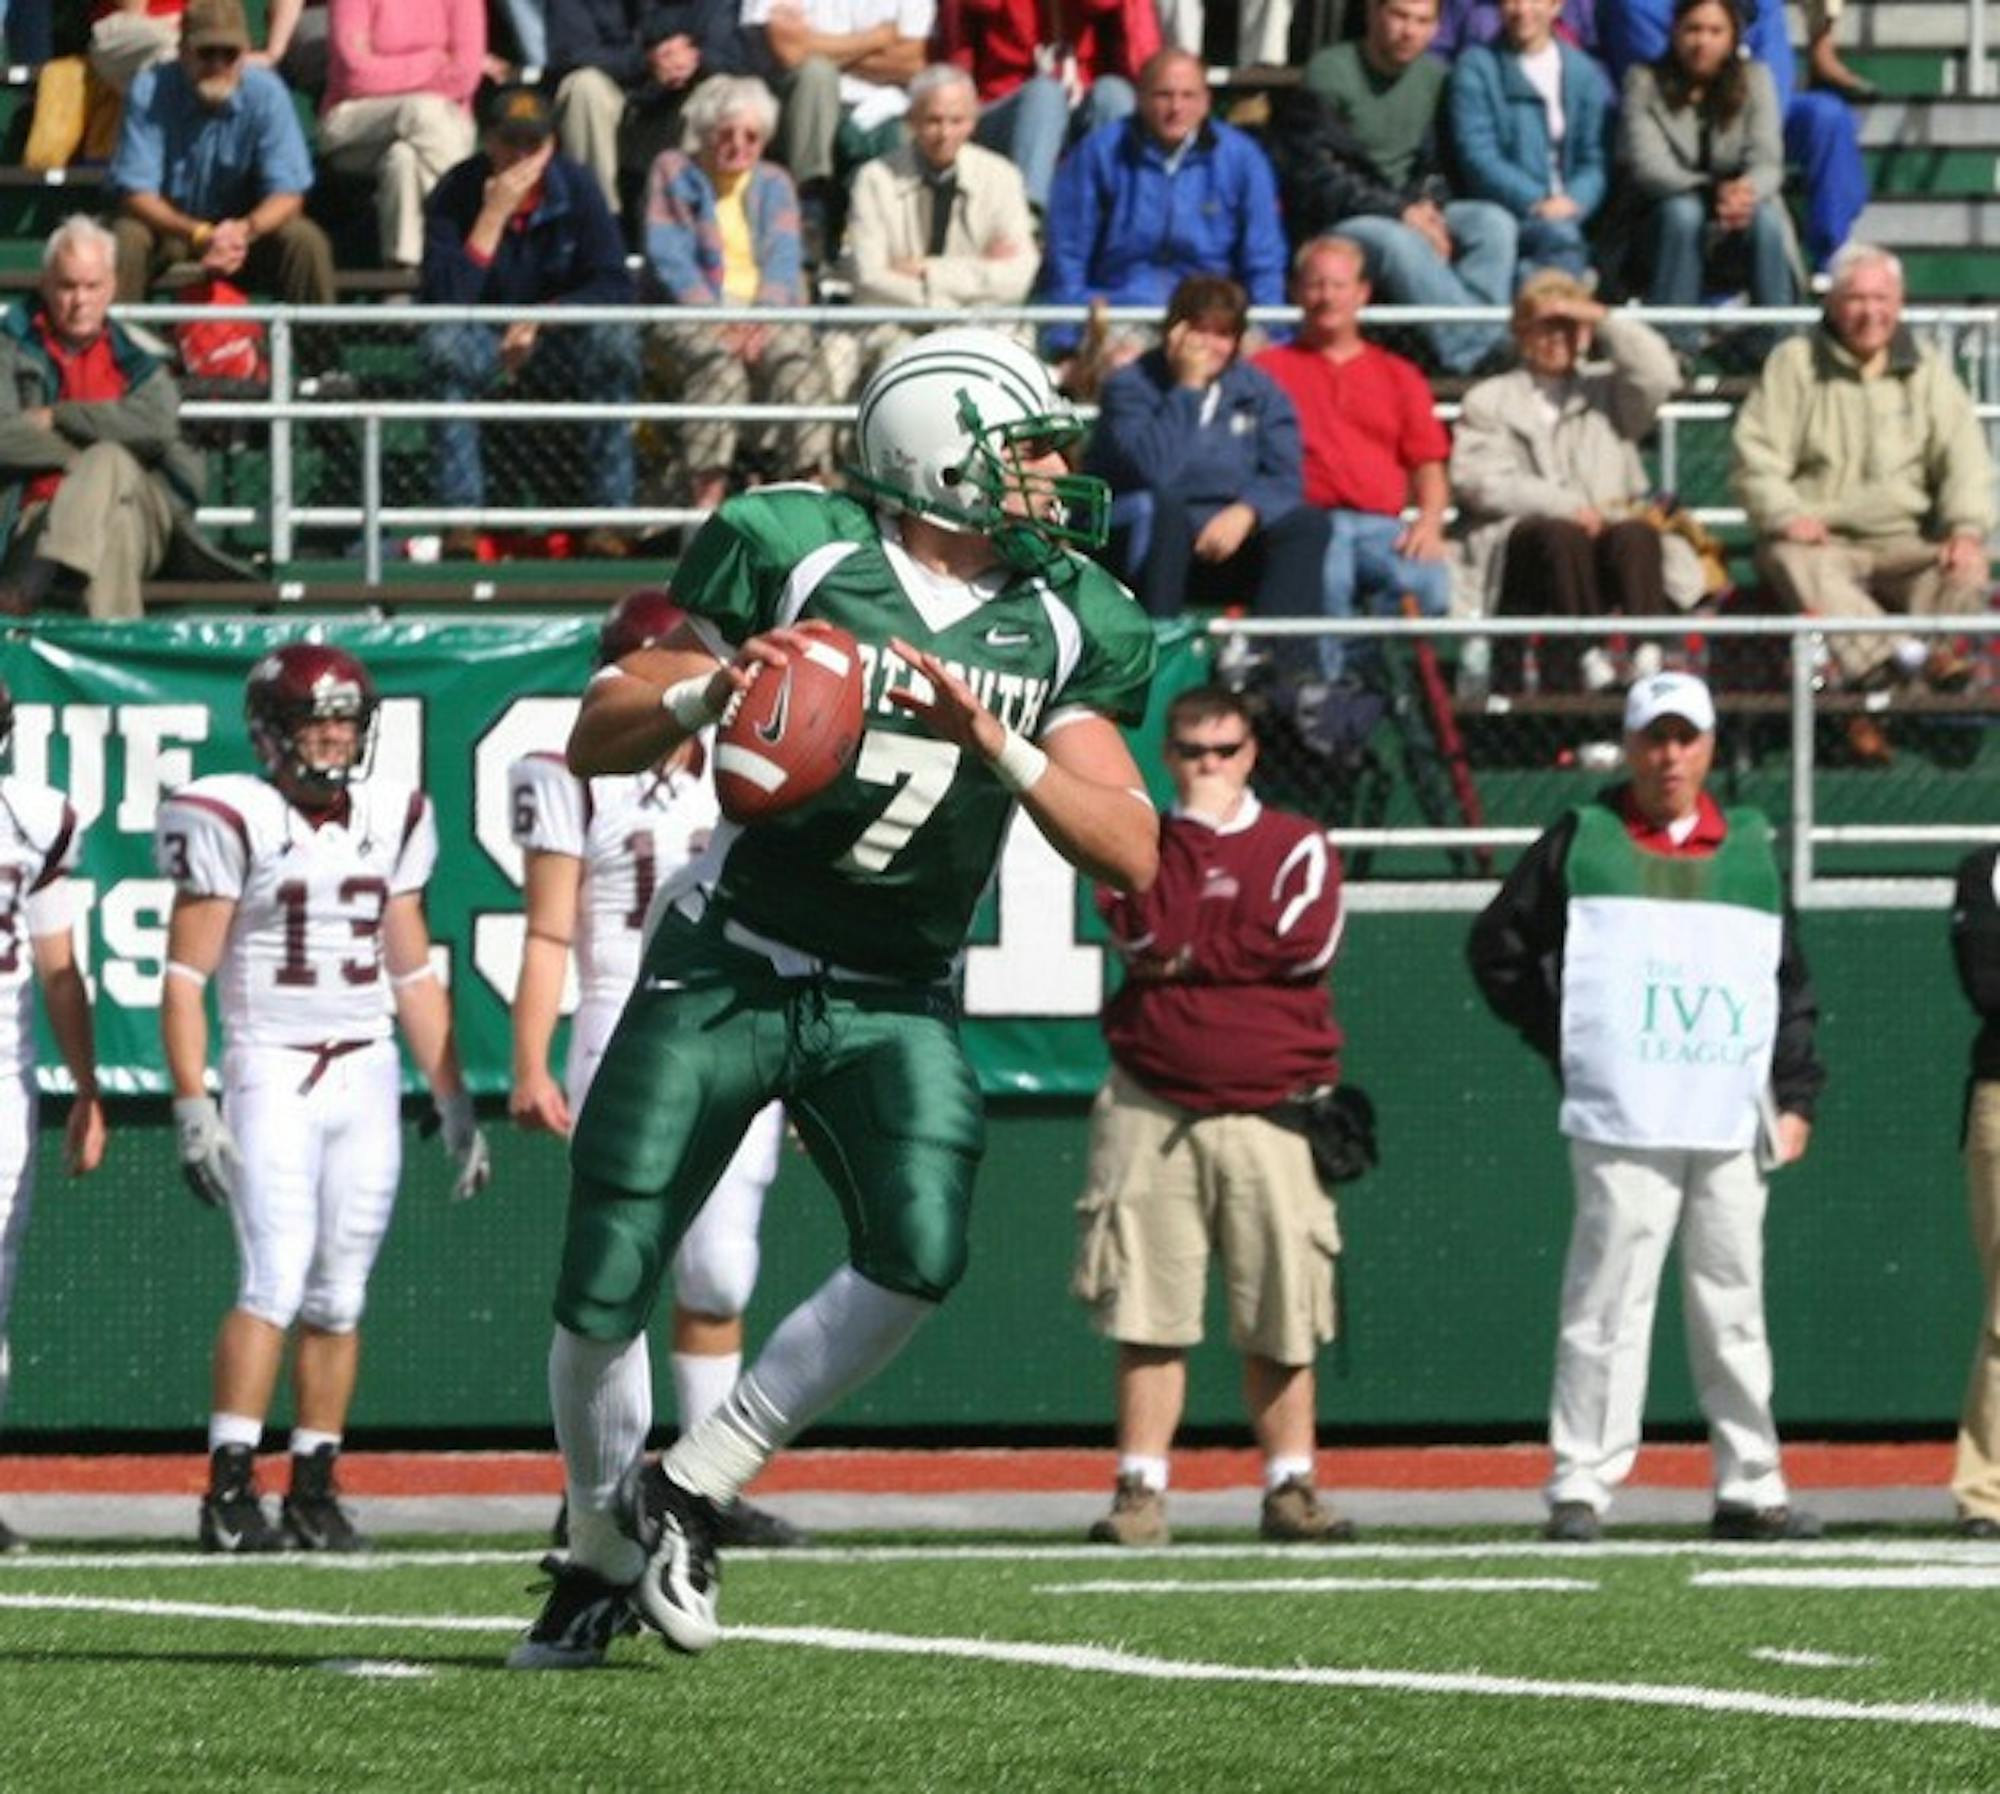 Tom Bennewitz '08 struggled to find the endzone in a 50-10 loss at Yale.